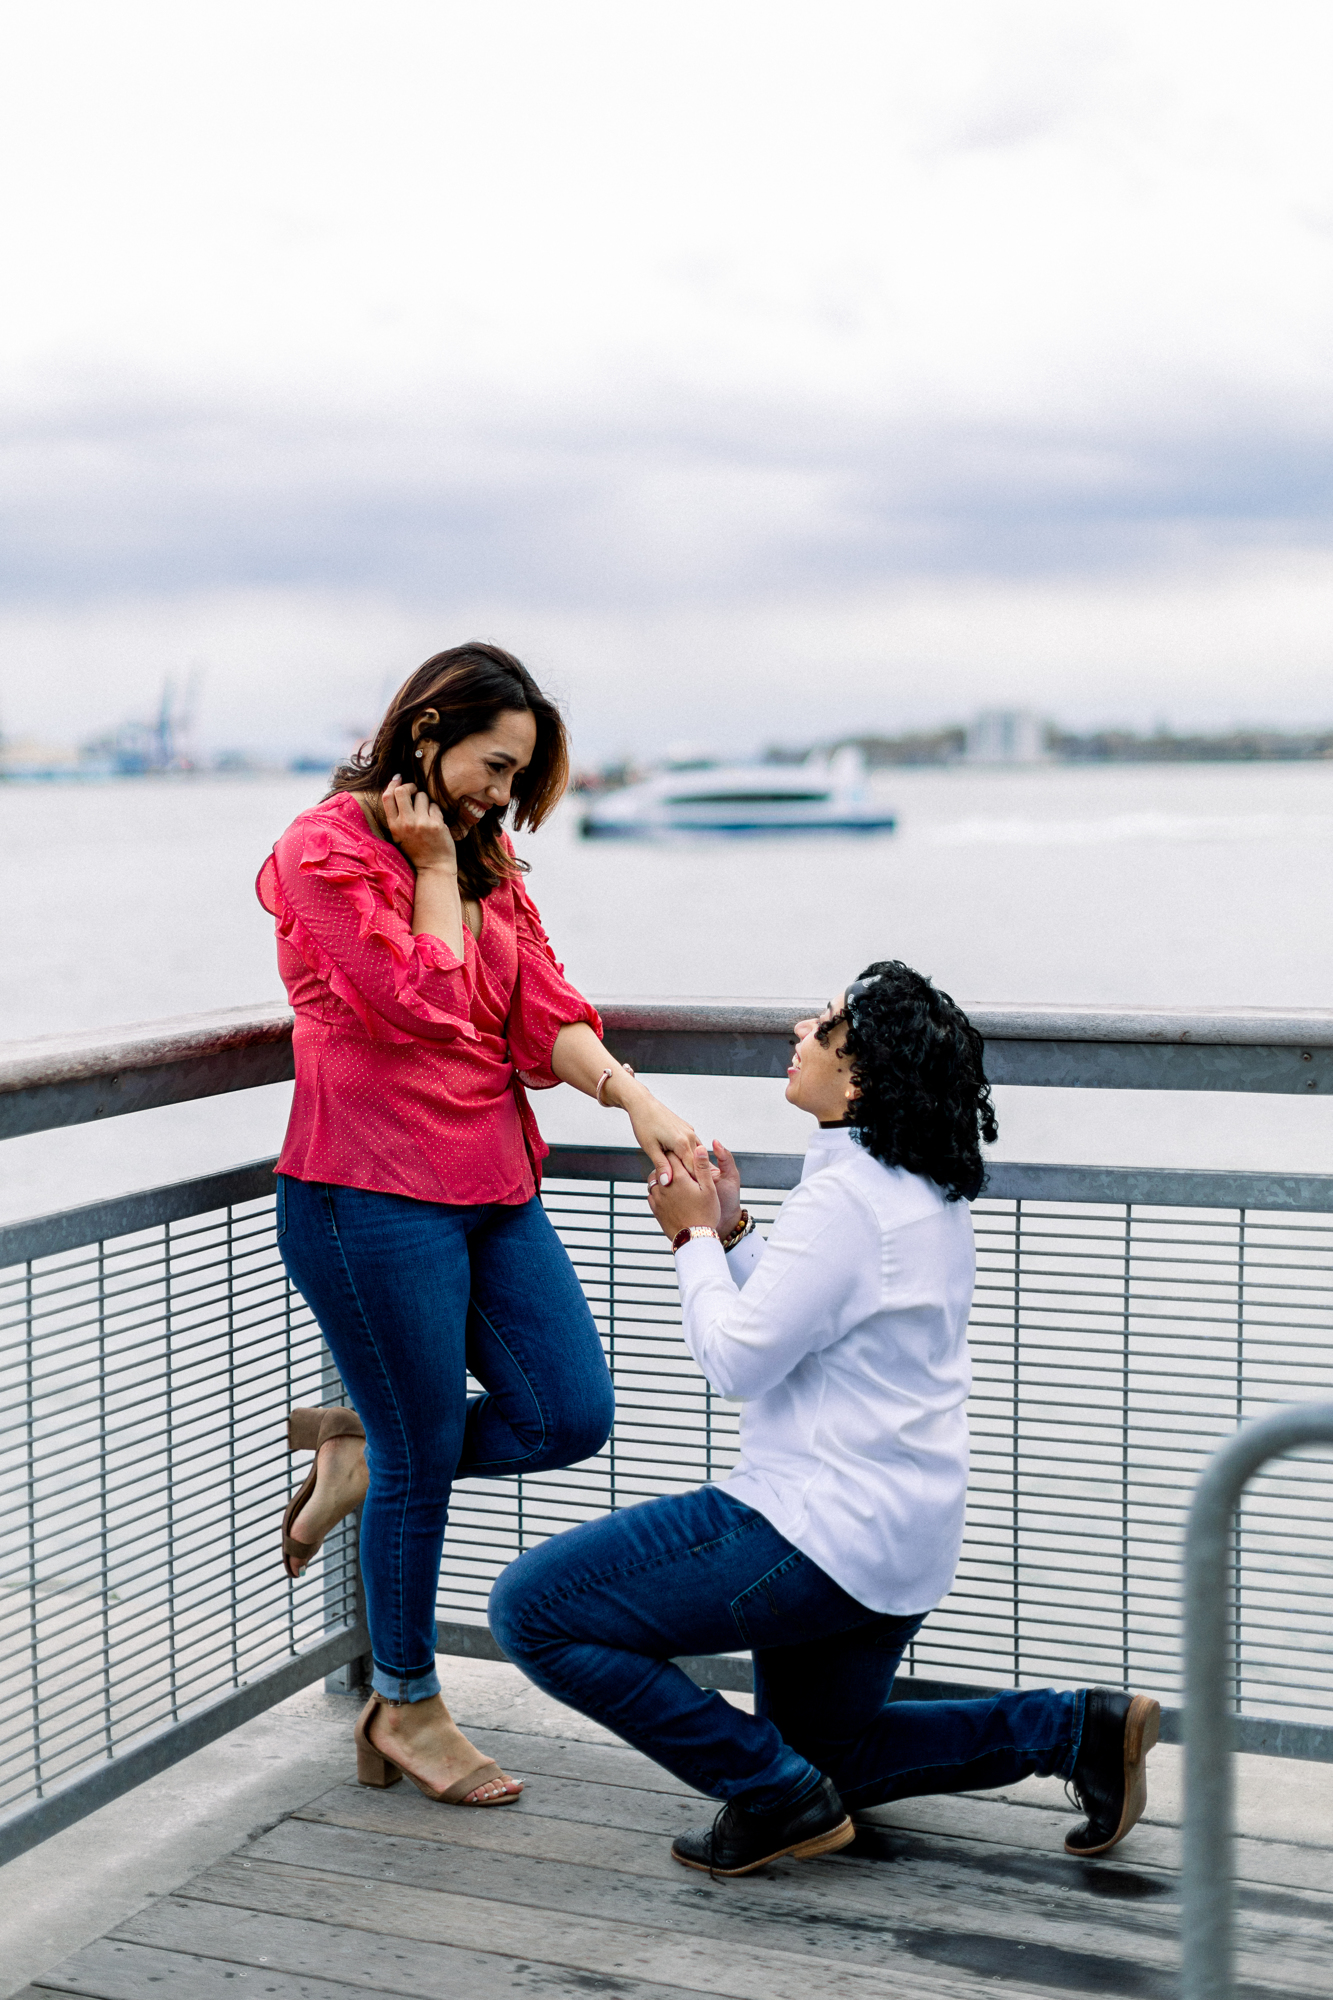 Memorable South Street Seaport Engagement Photography